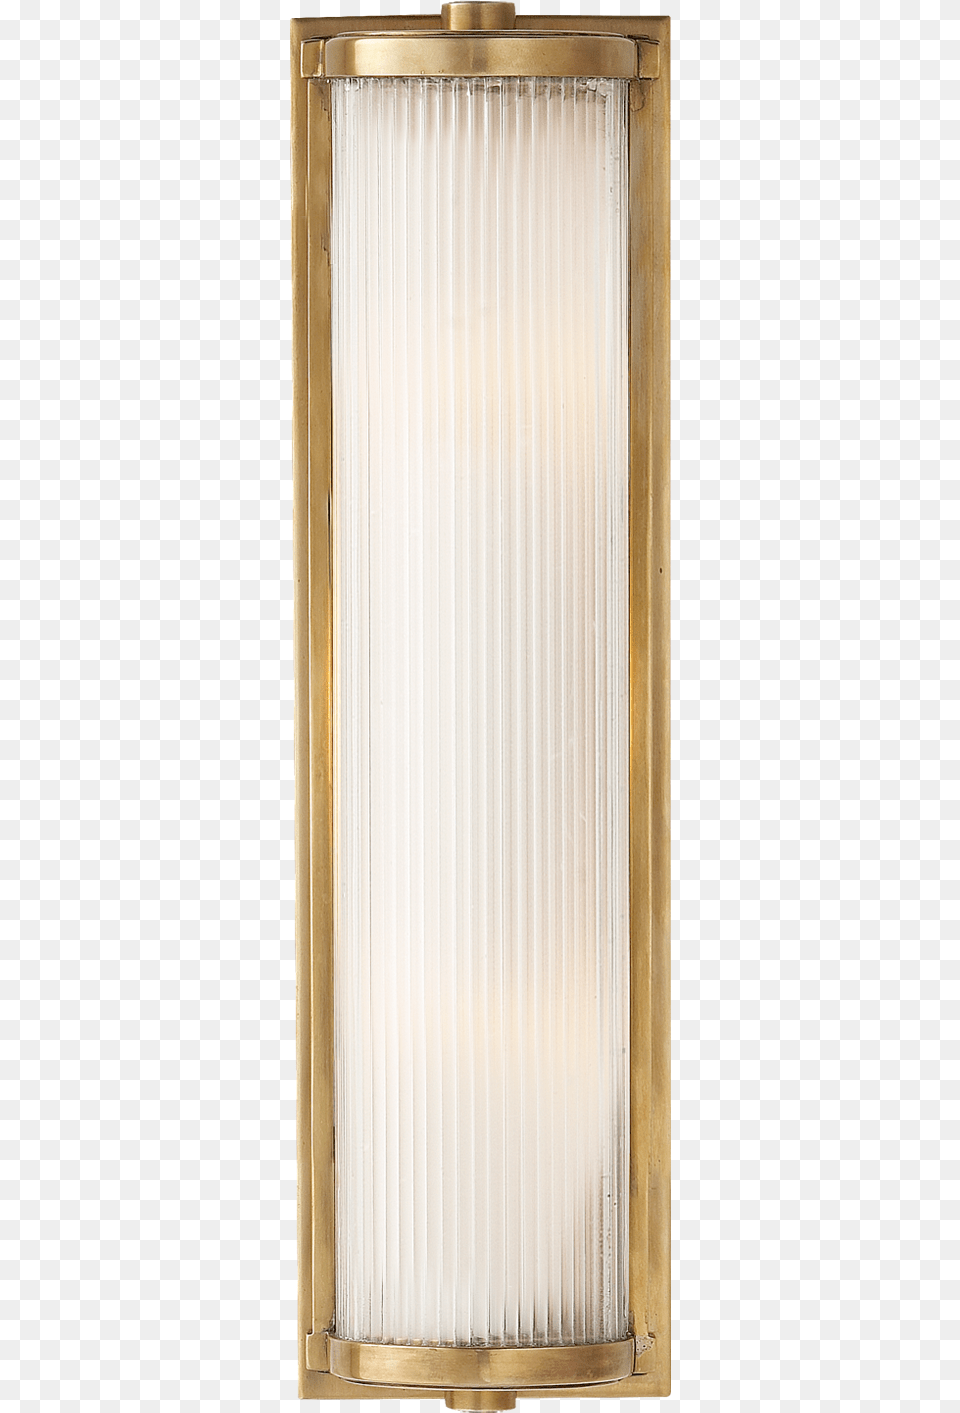 Wood, Curtain, Home Decor, Texture, Window Shade Png Image